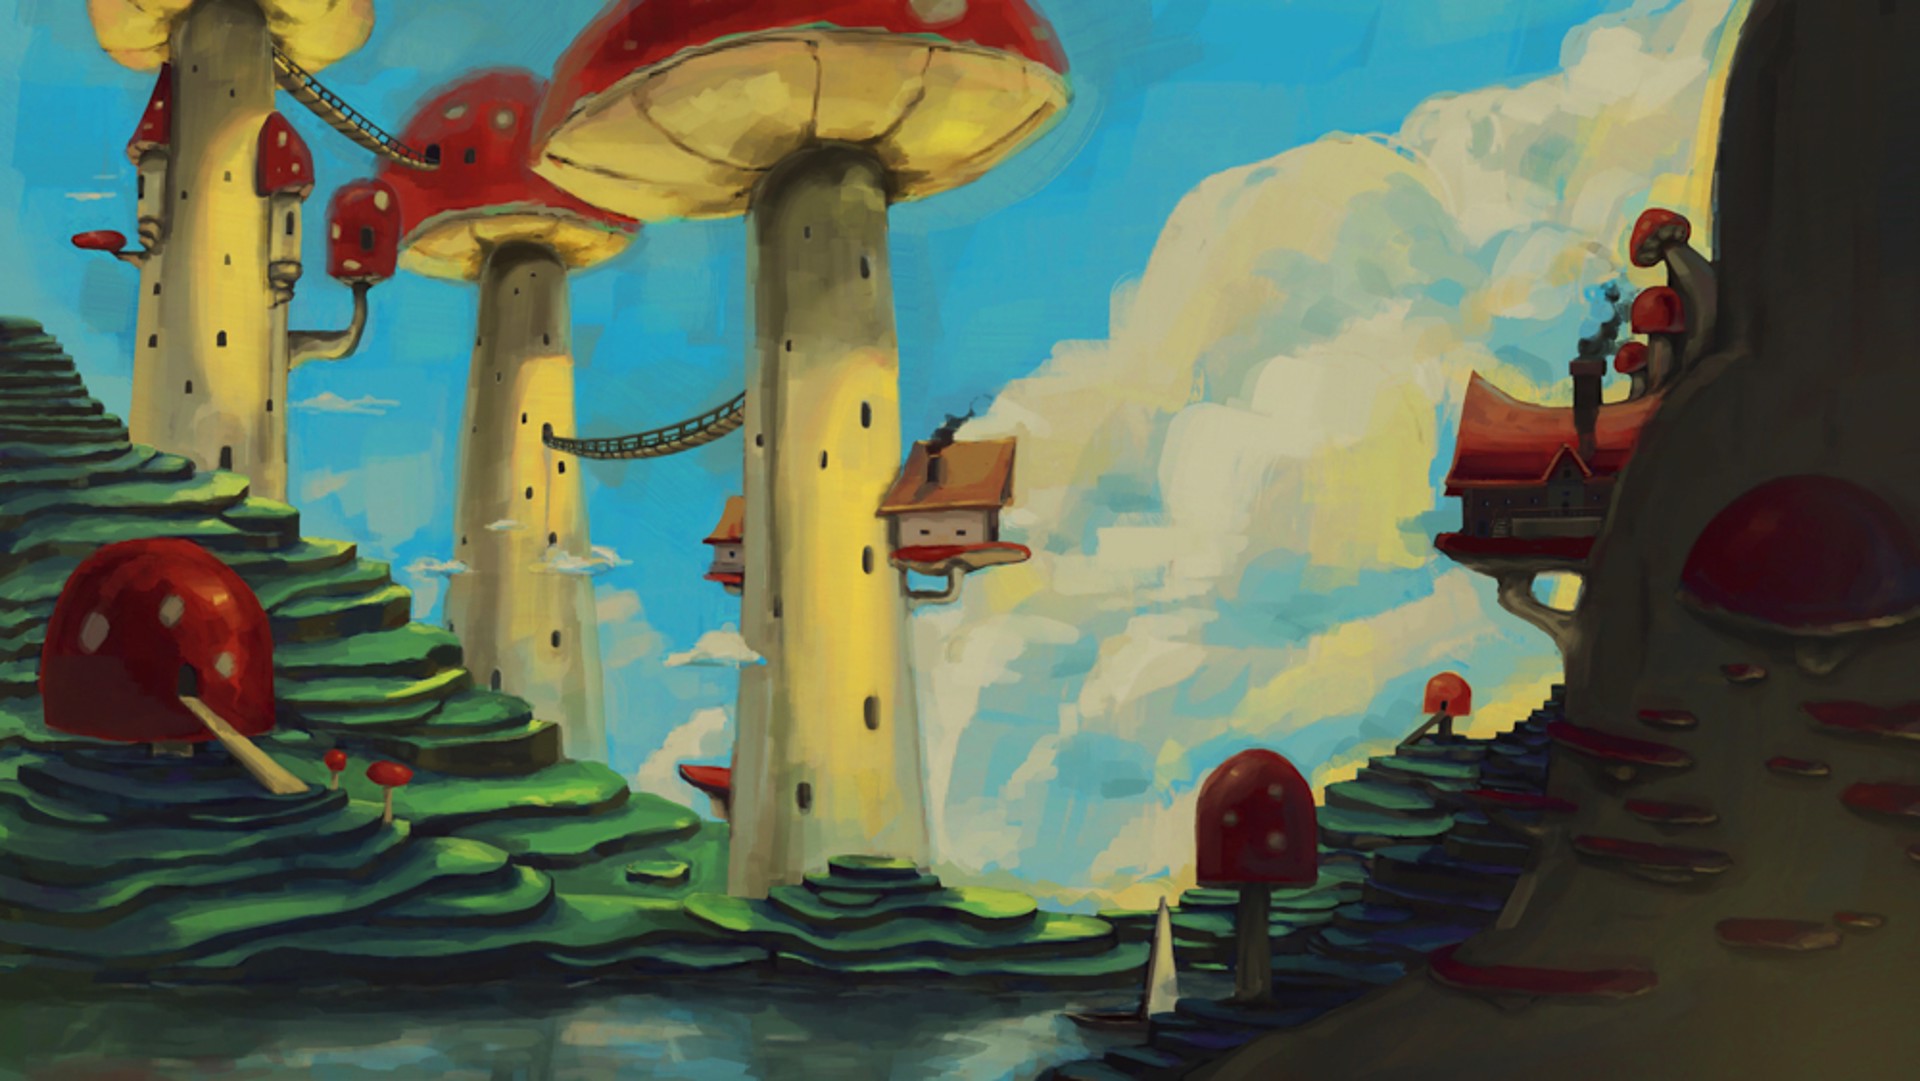 The Toadstool Town by John Huynh